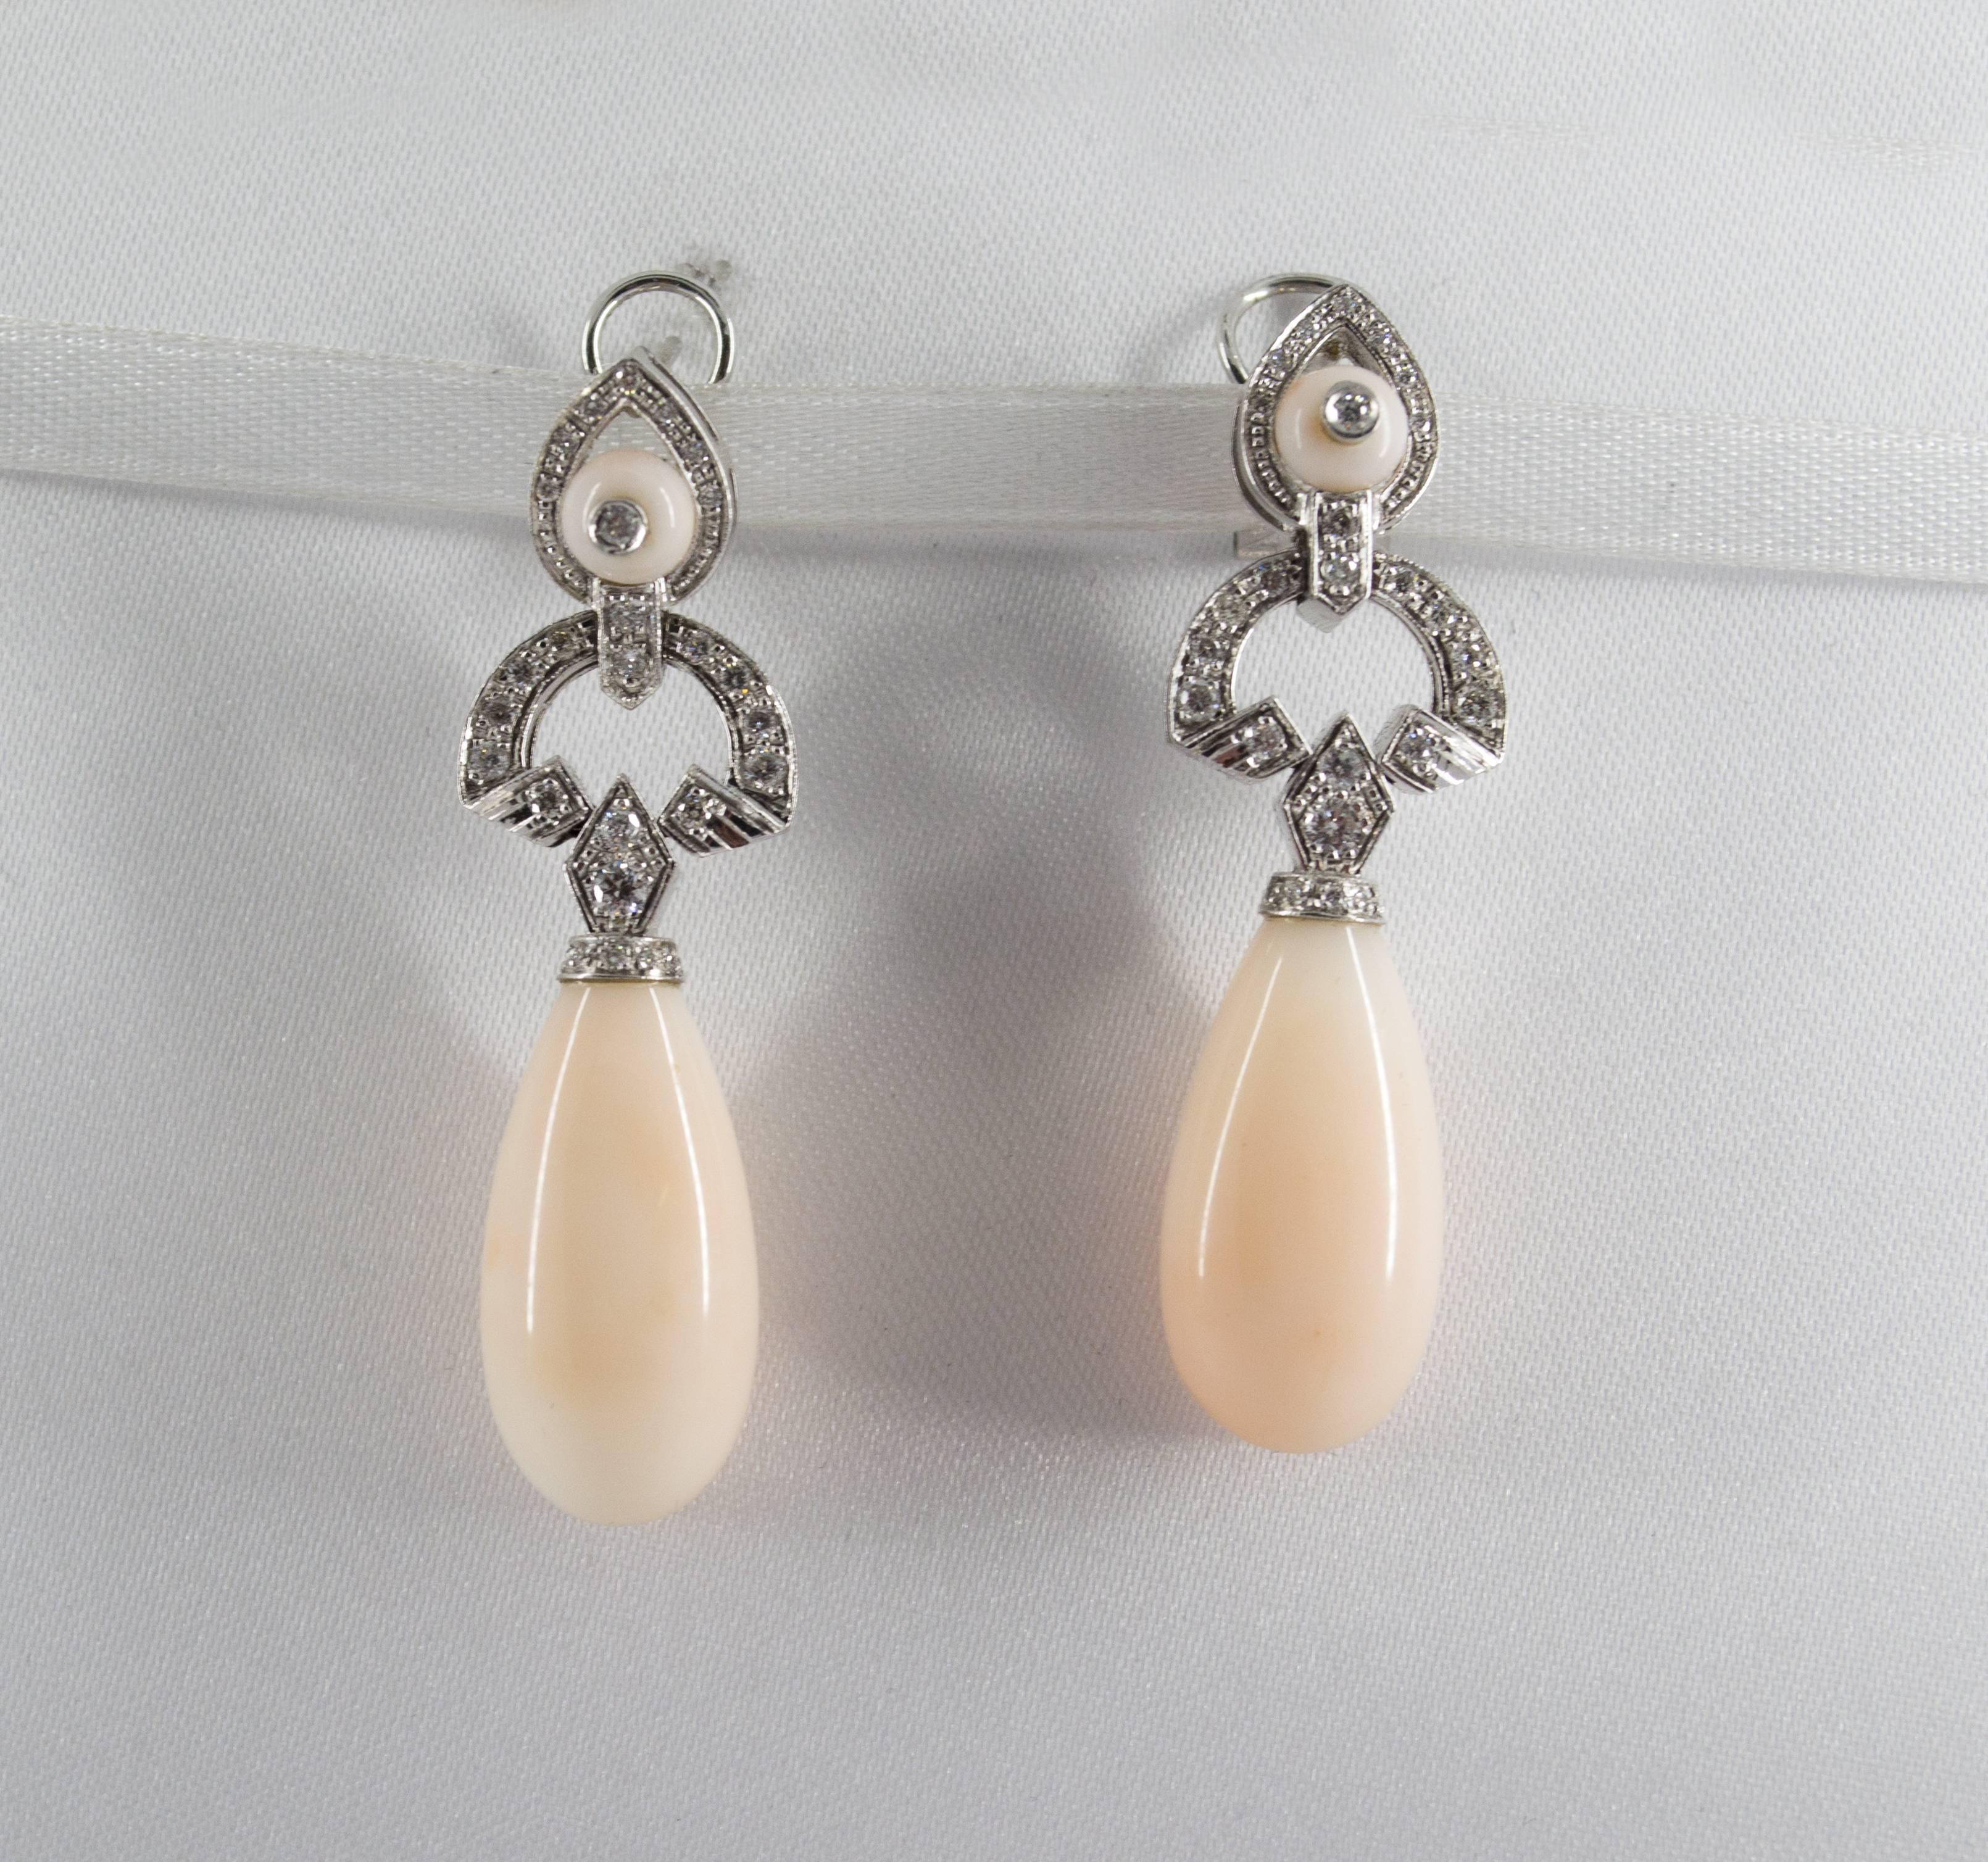 These Earrings are made of 9K White Gold.
These Earrings have 0.90 Carats of White Diamonds.
These Earrings have Pink Coral.
All our Earrings have pins for pierced ears but we can change the closure and make any of our Earrings suitable even for